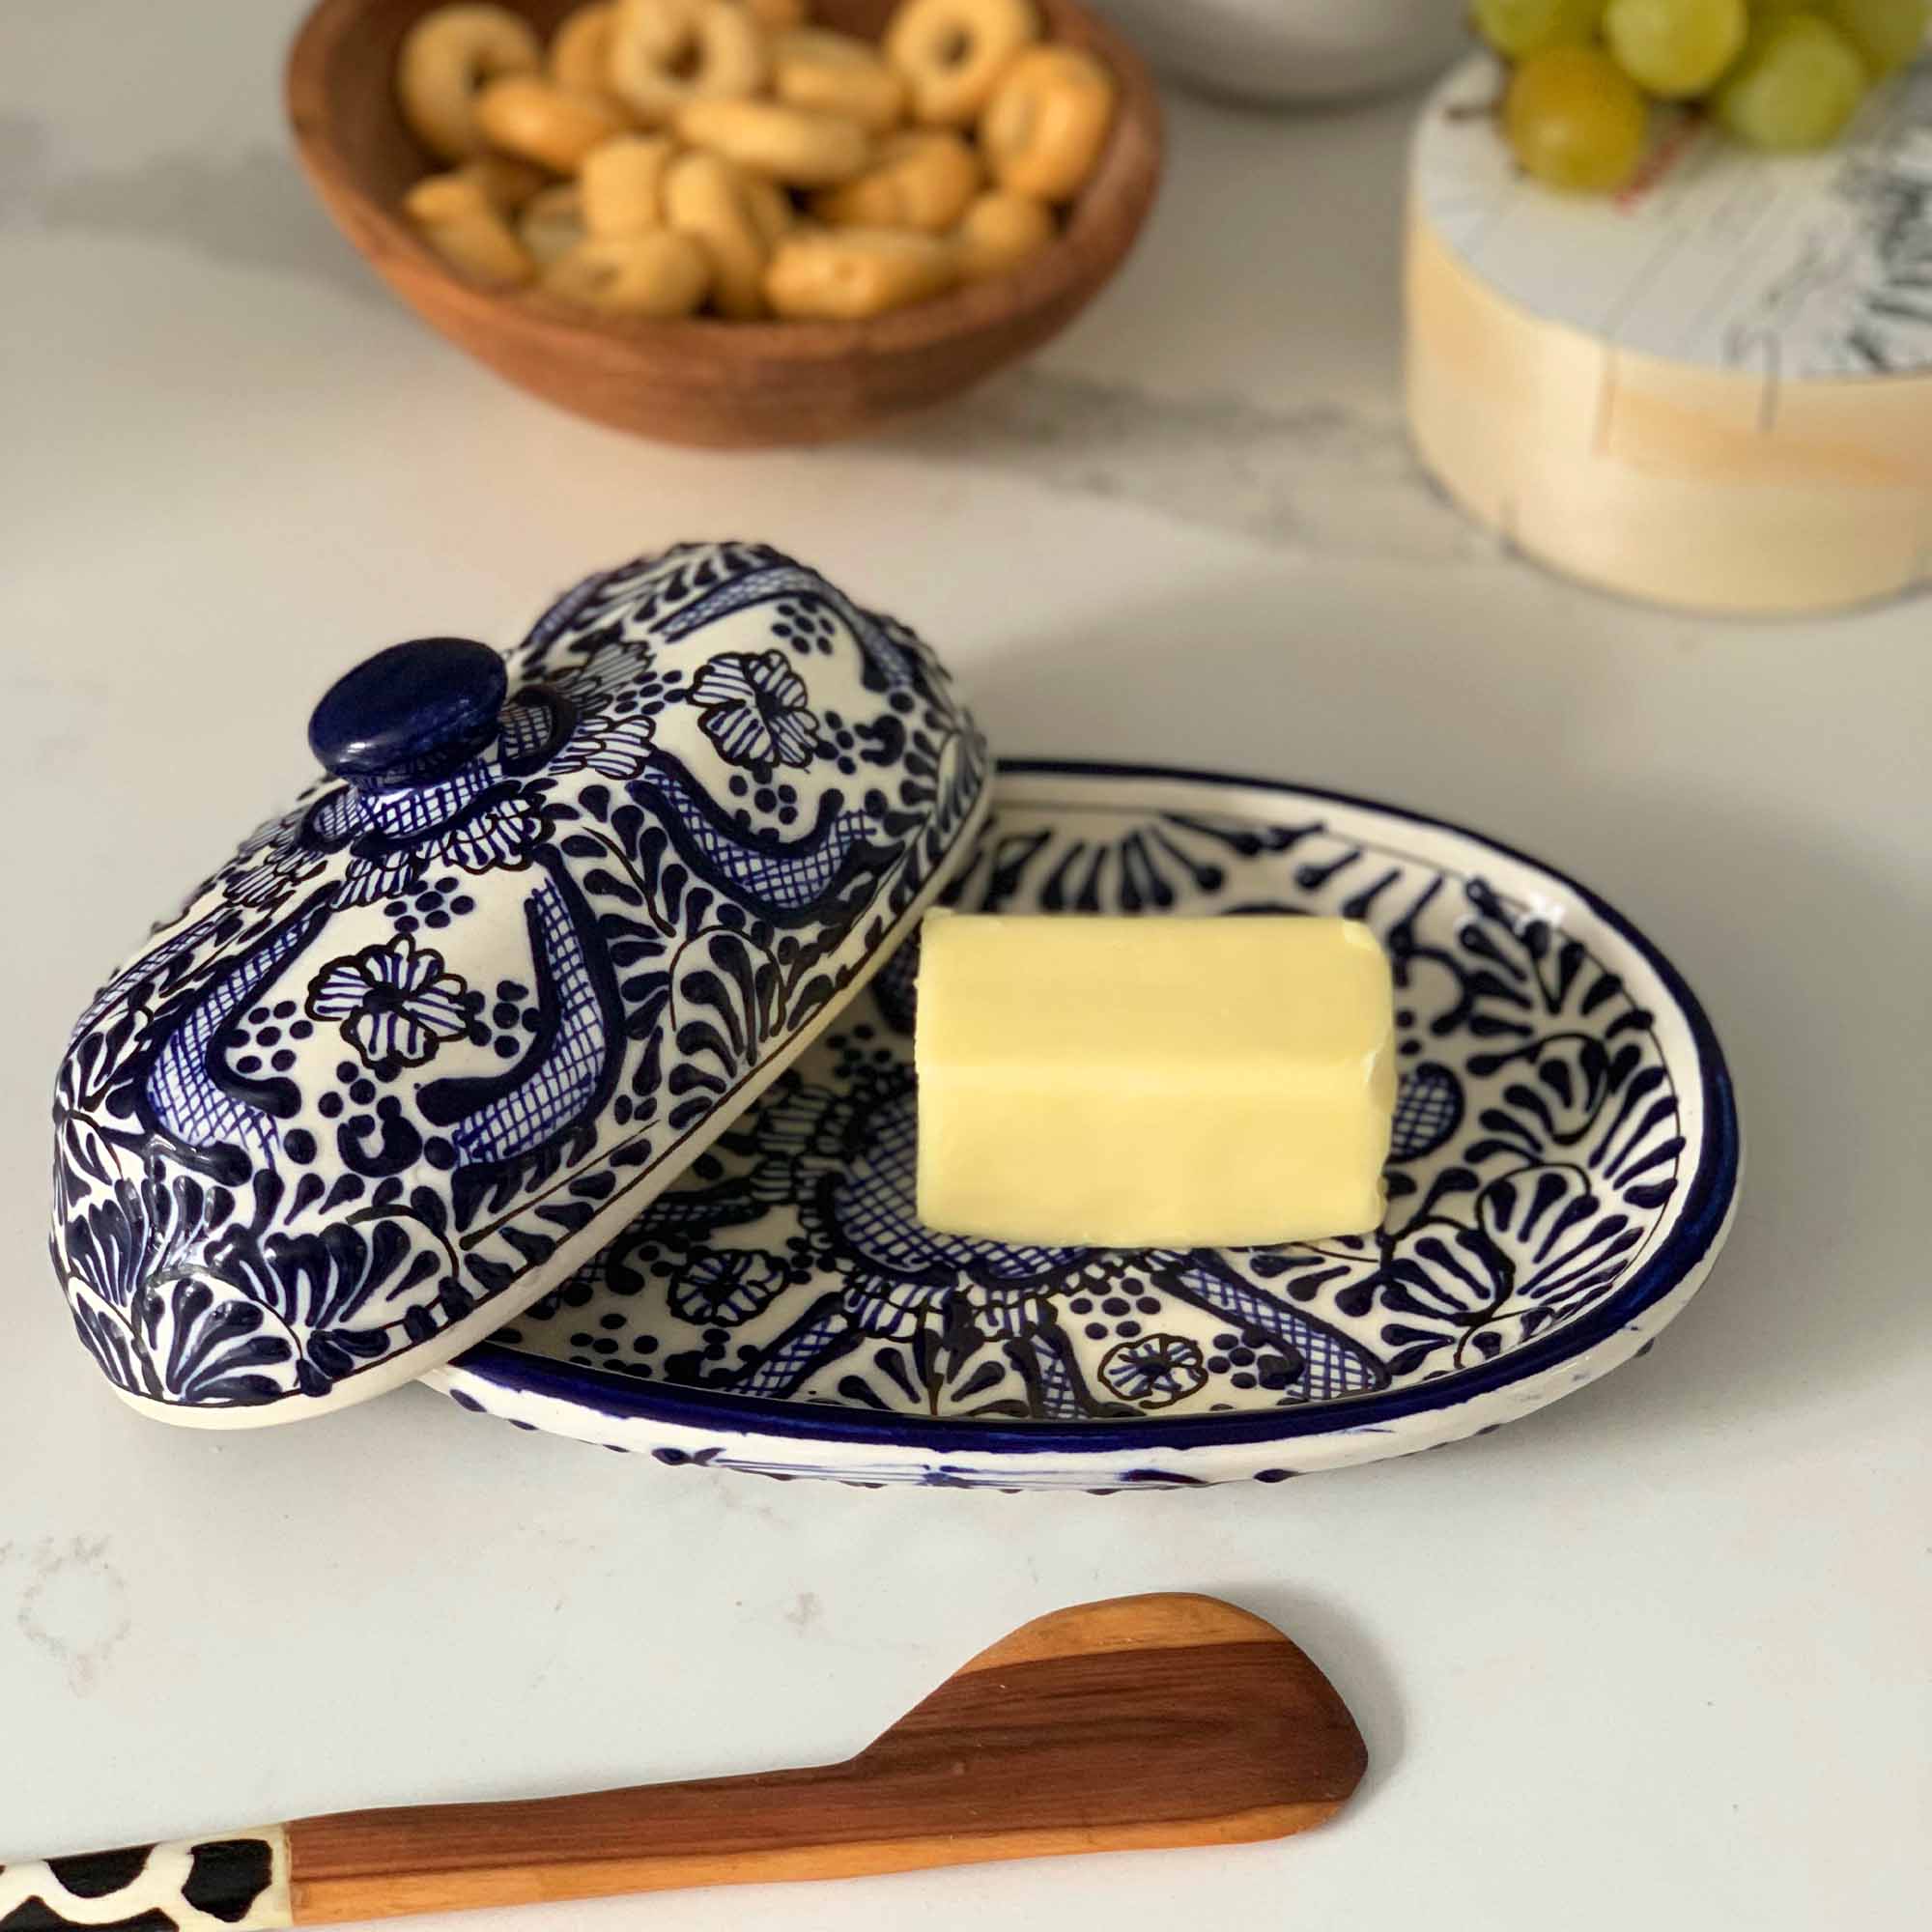 Authentic Mexican Pottery butter dish in blue and white flower design with hand-carved wood serving piece from Kenya.